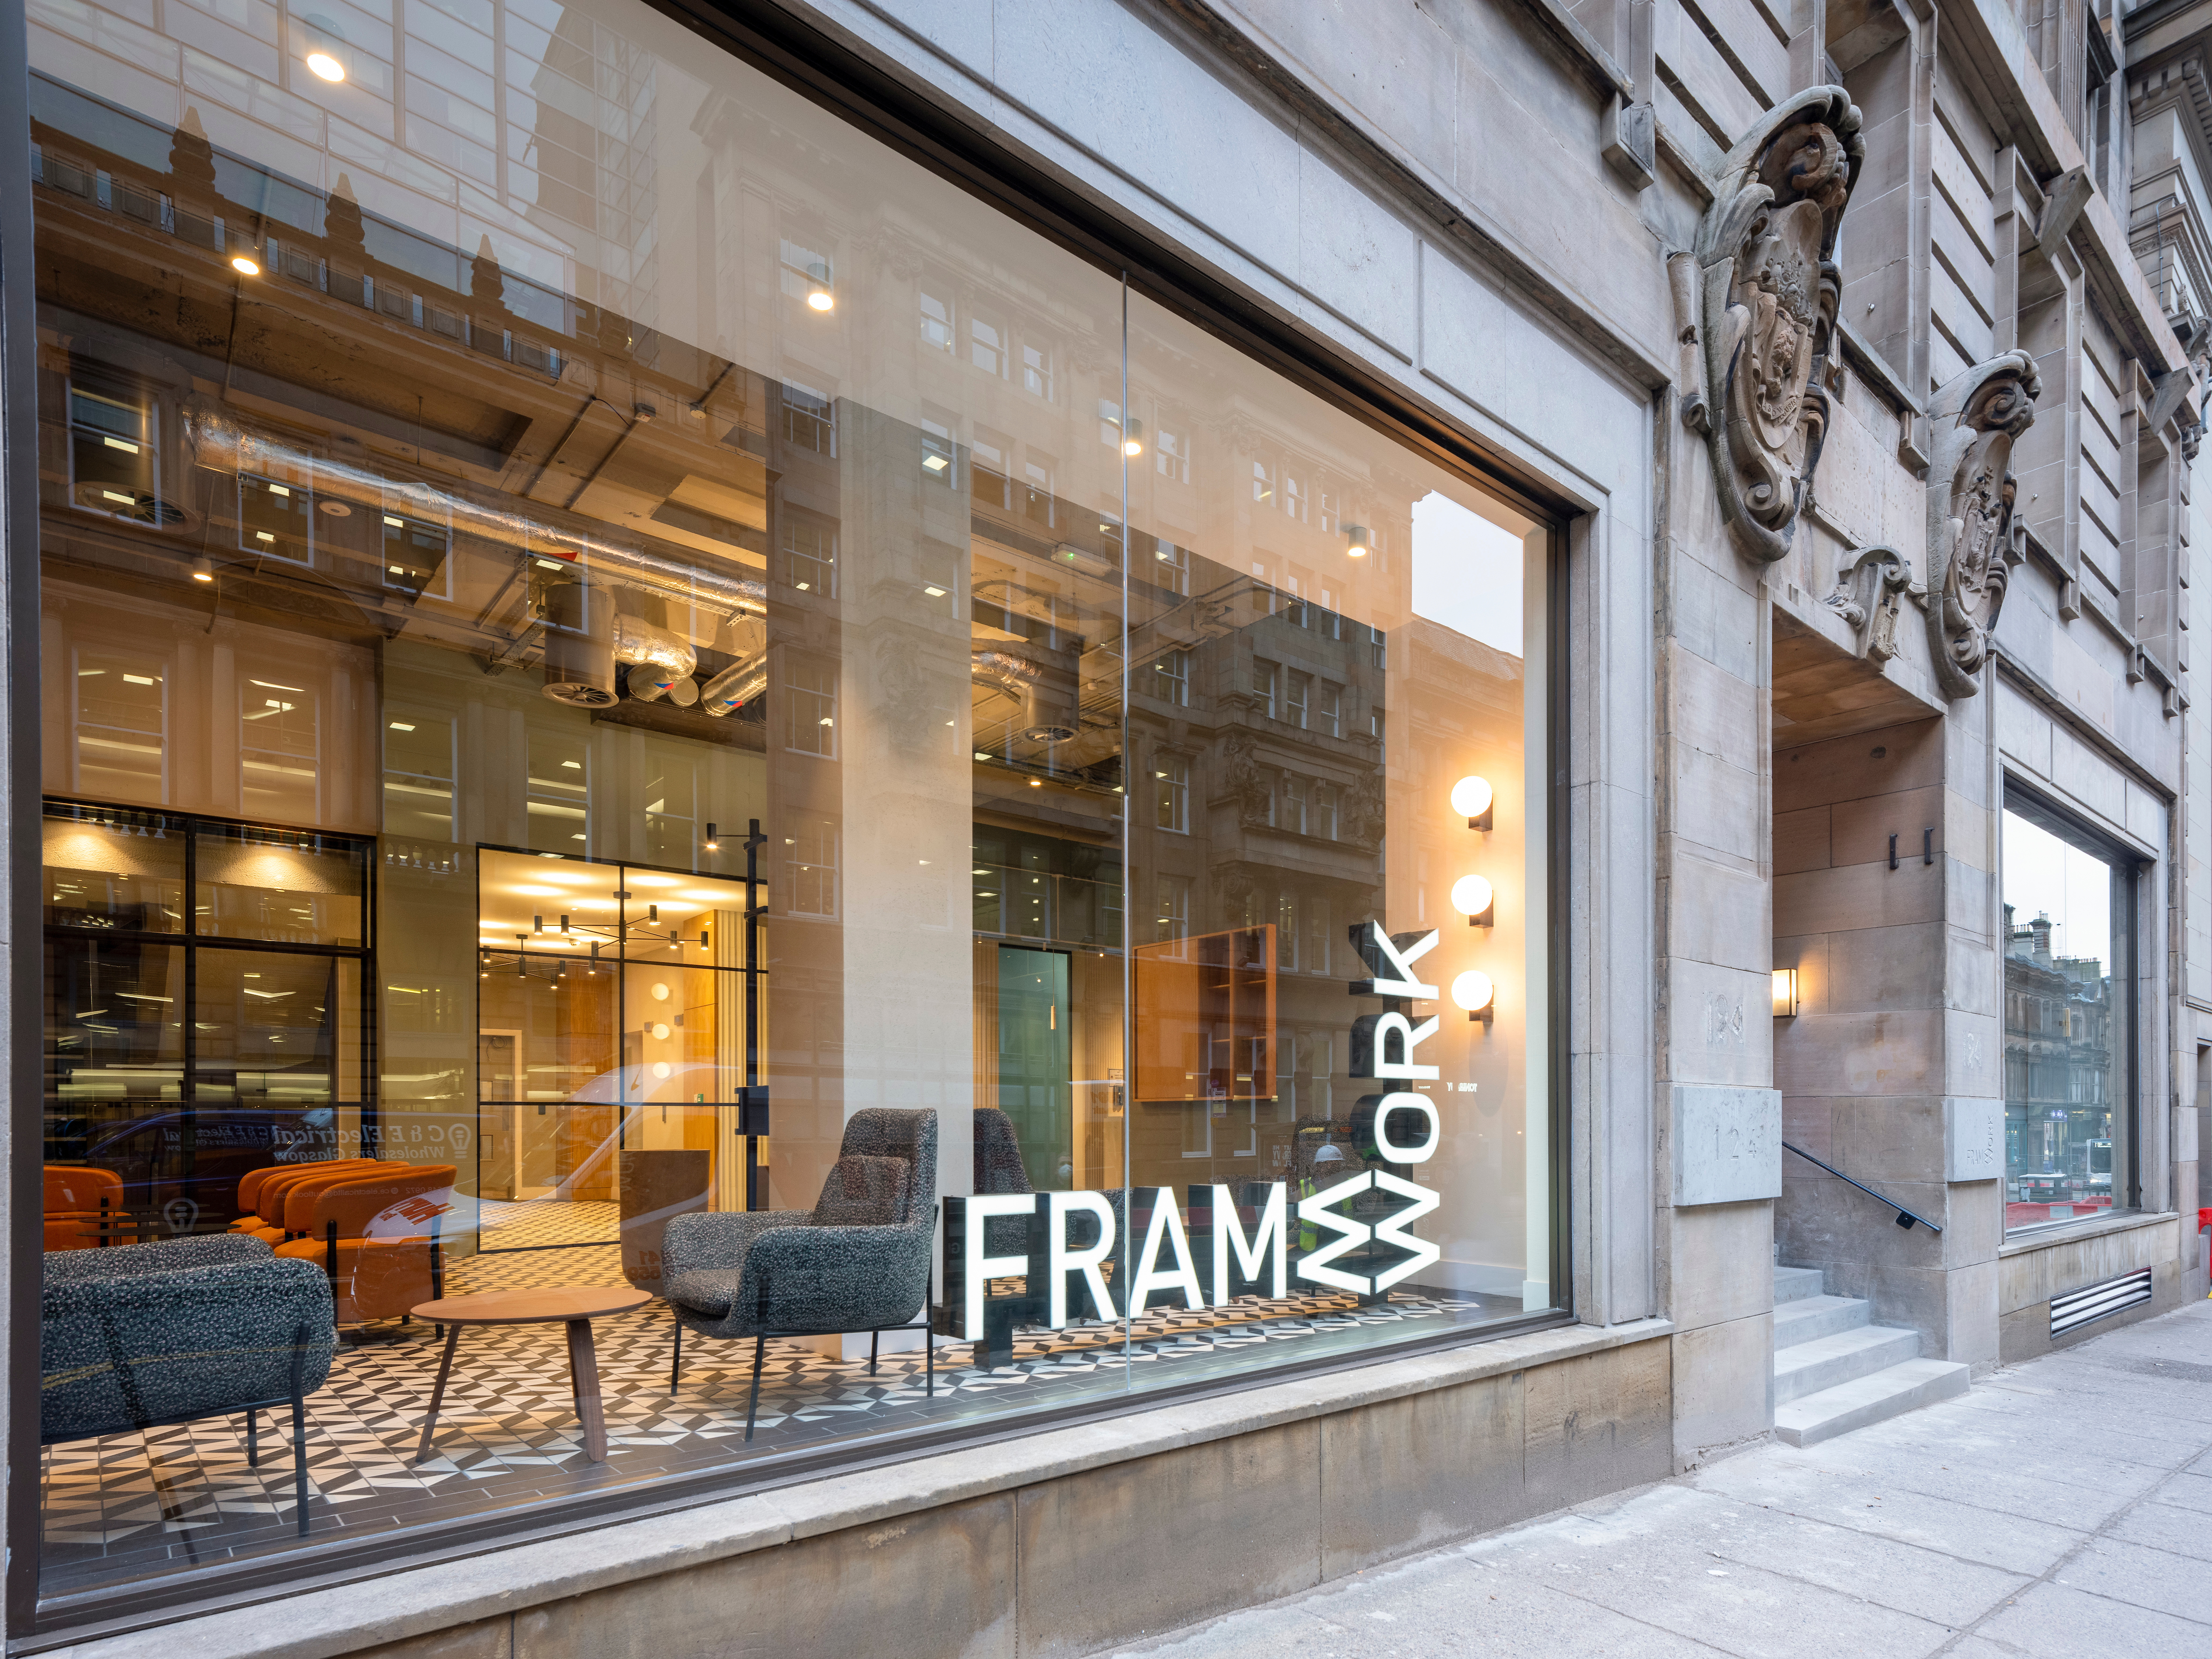 Four new tenants secured at Glasgow’s Framework building Image